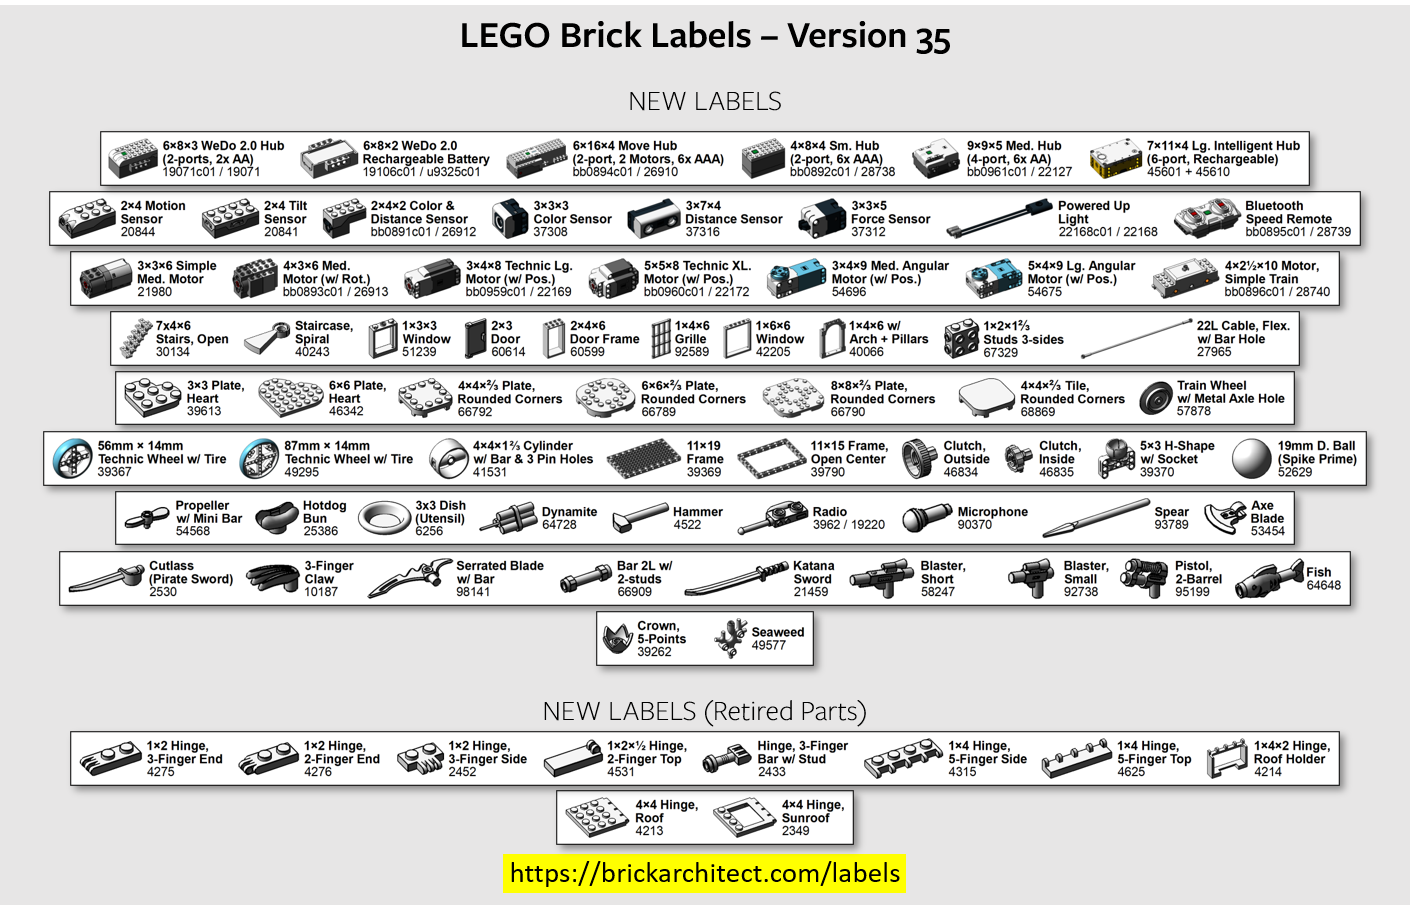 get-44-template-lego-name-tags-free-printables-long-sleeve-corporate